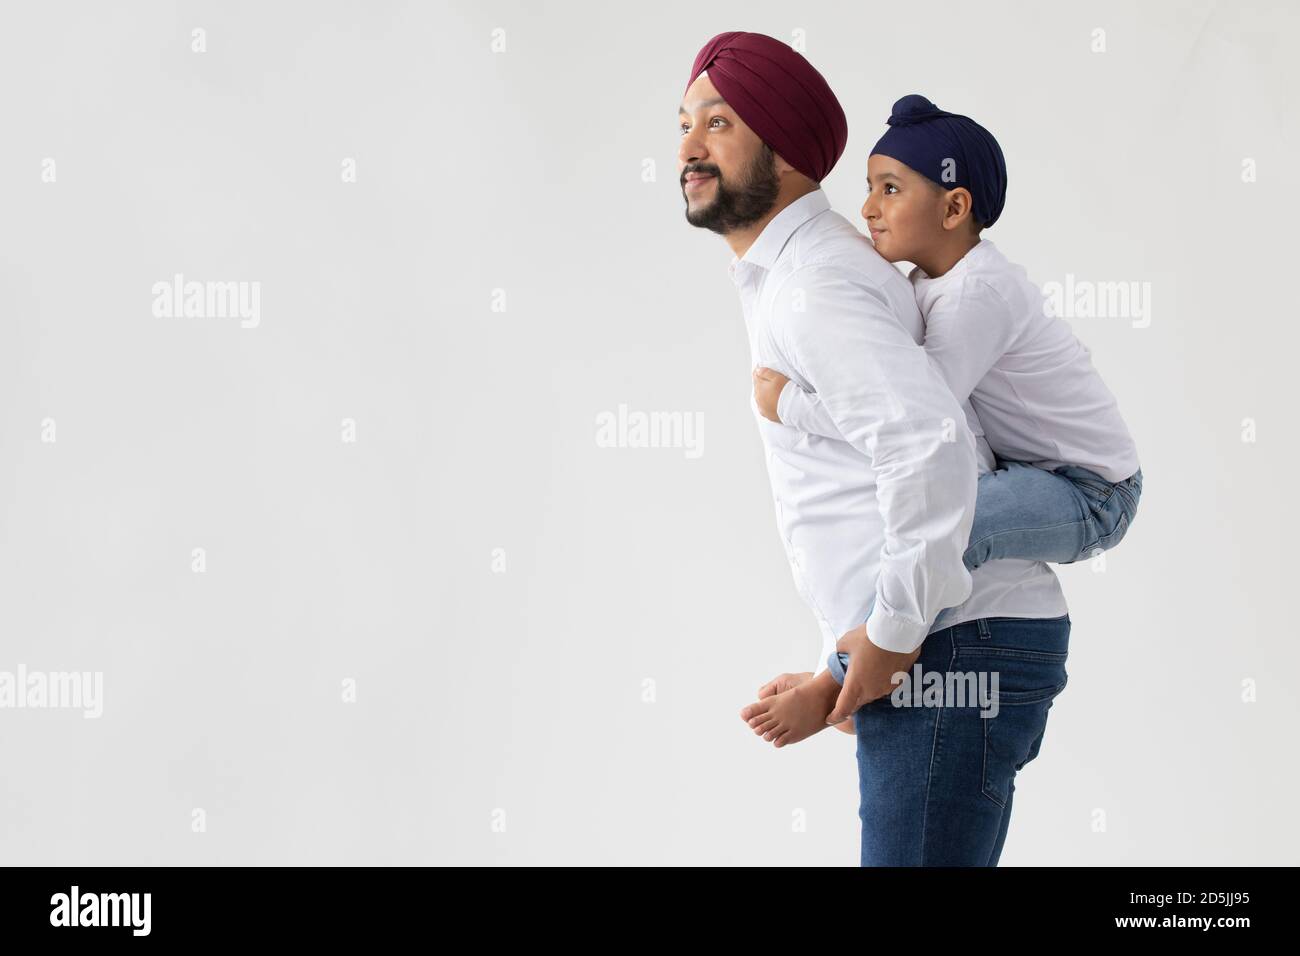 A SIKH FATHER CARRYING SON ON BACK AND LOOKING AHEAD Stock Photo